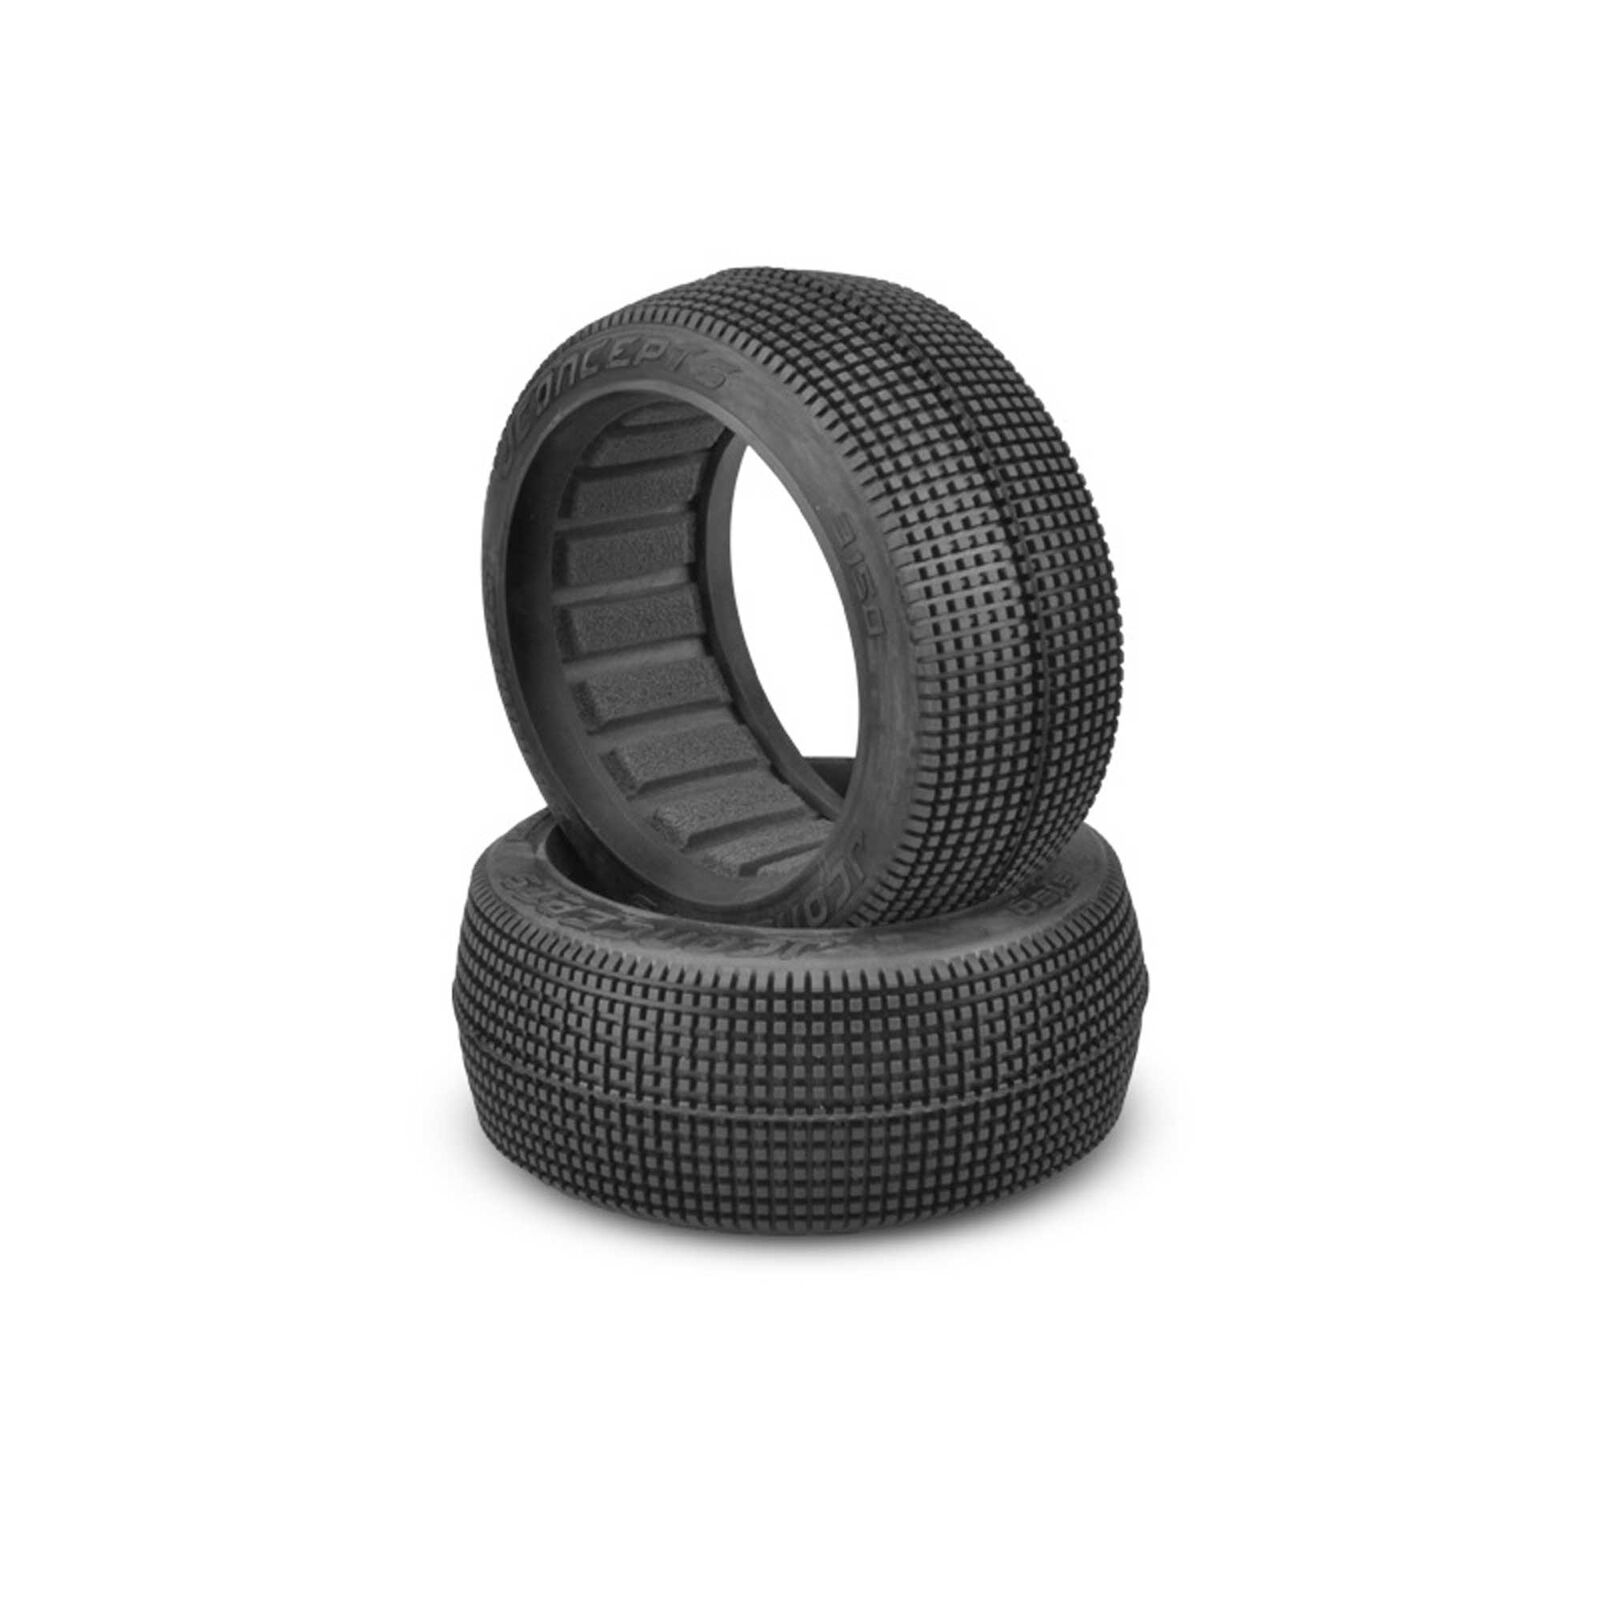 1/8 Blockers 83mm Buggy Tires and Inserts, Blue Compound (2)